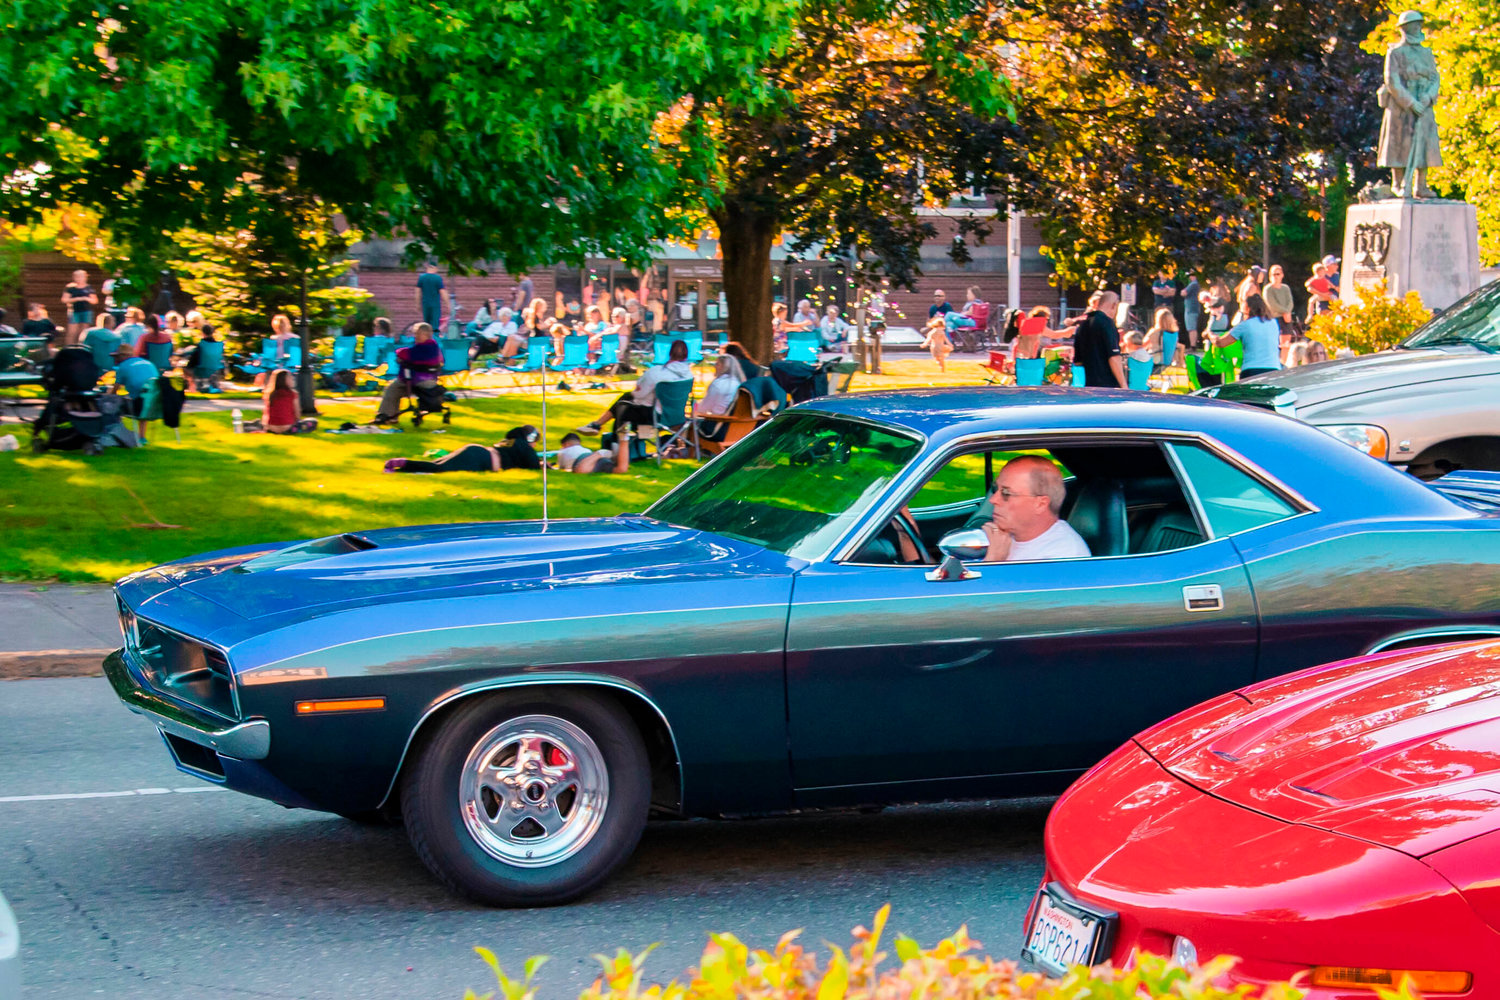 Vintage cars drive by as crowds gather for “Music in the Park” Saturday in Centralia.